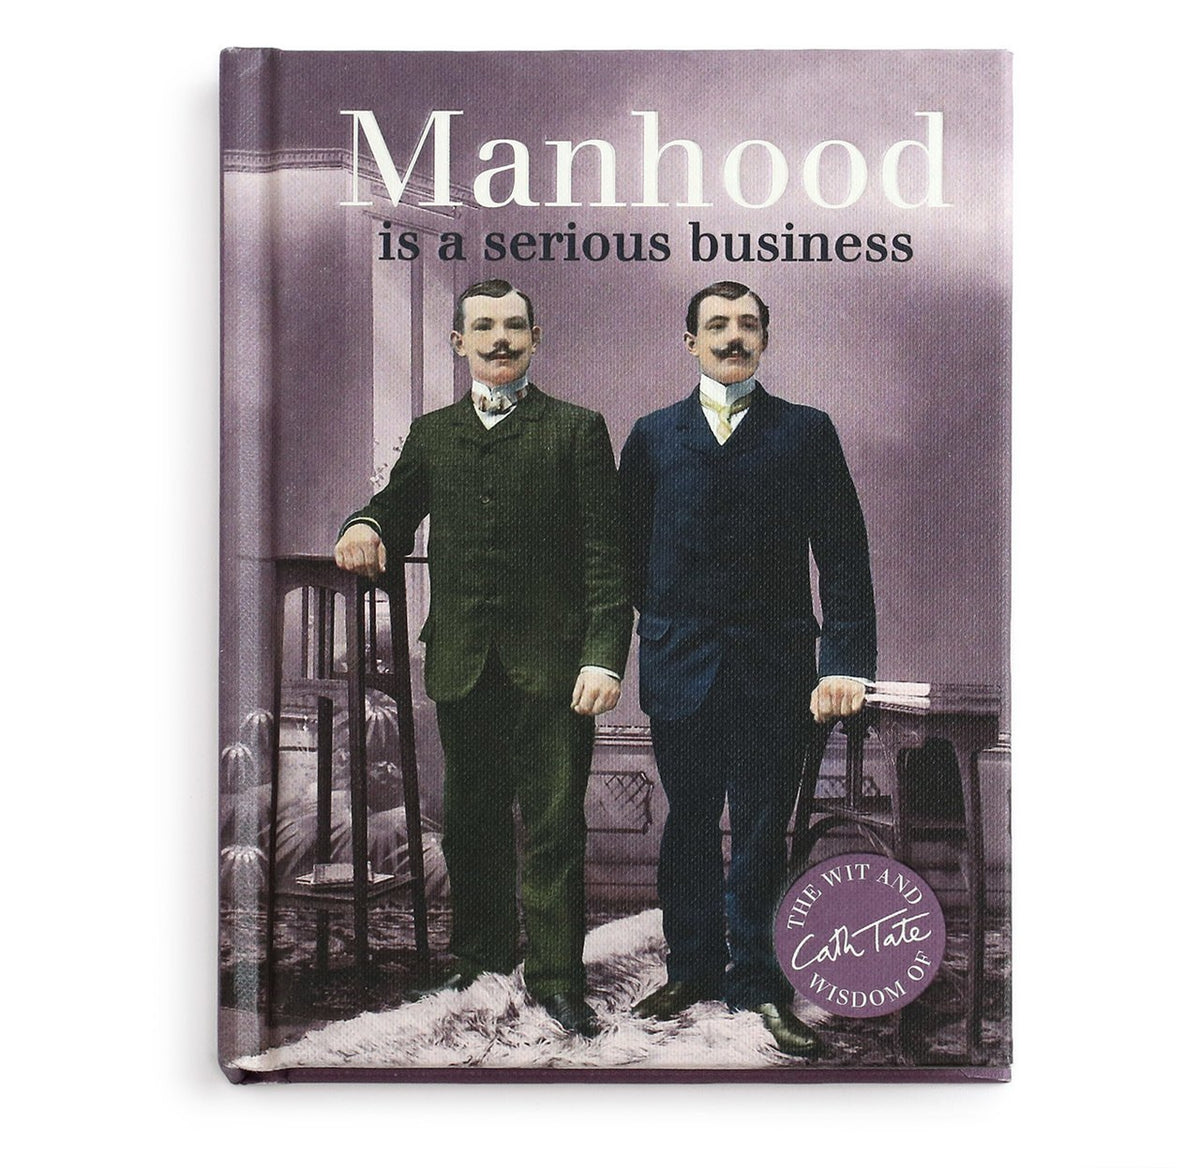 Manhood Is a Serious Business by Cath Tate